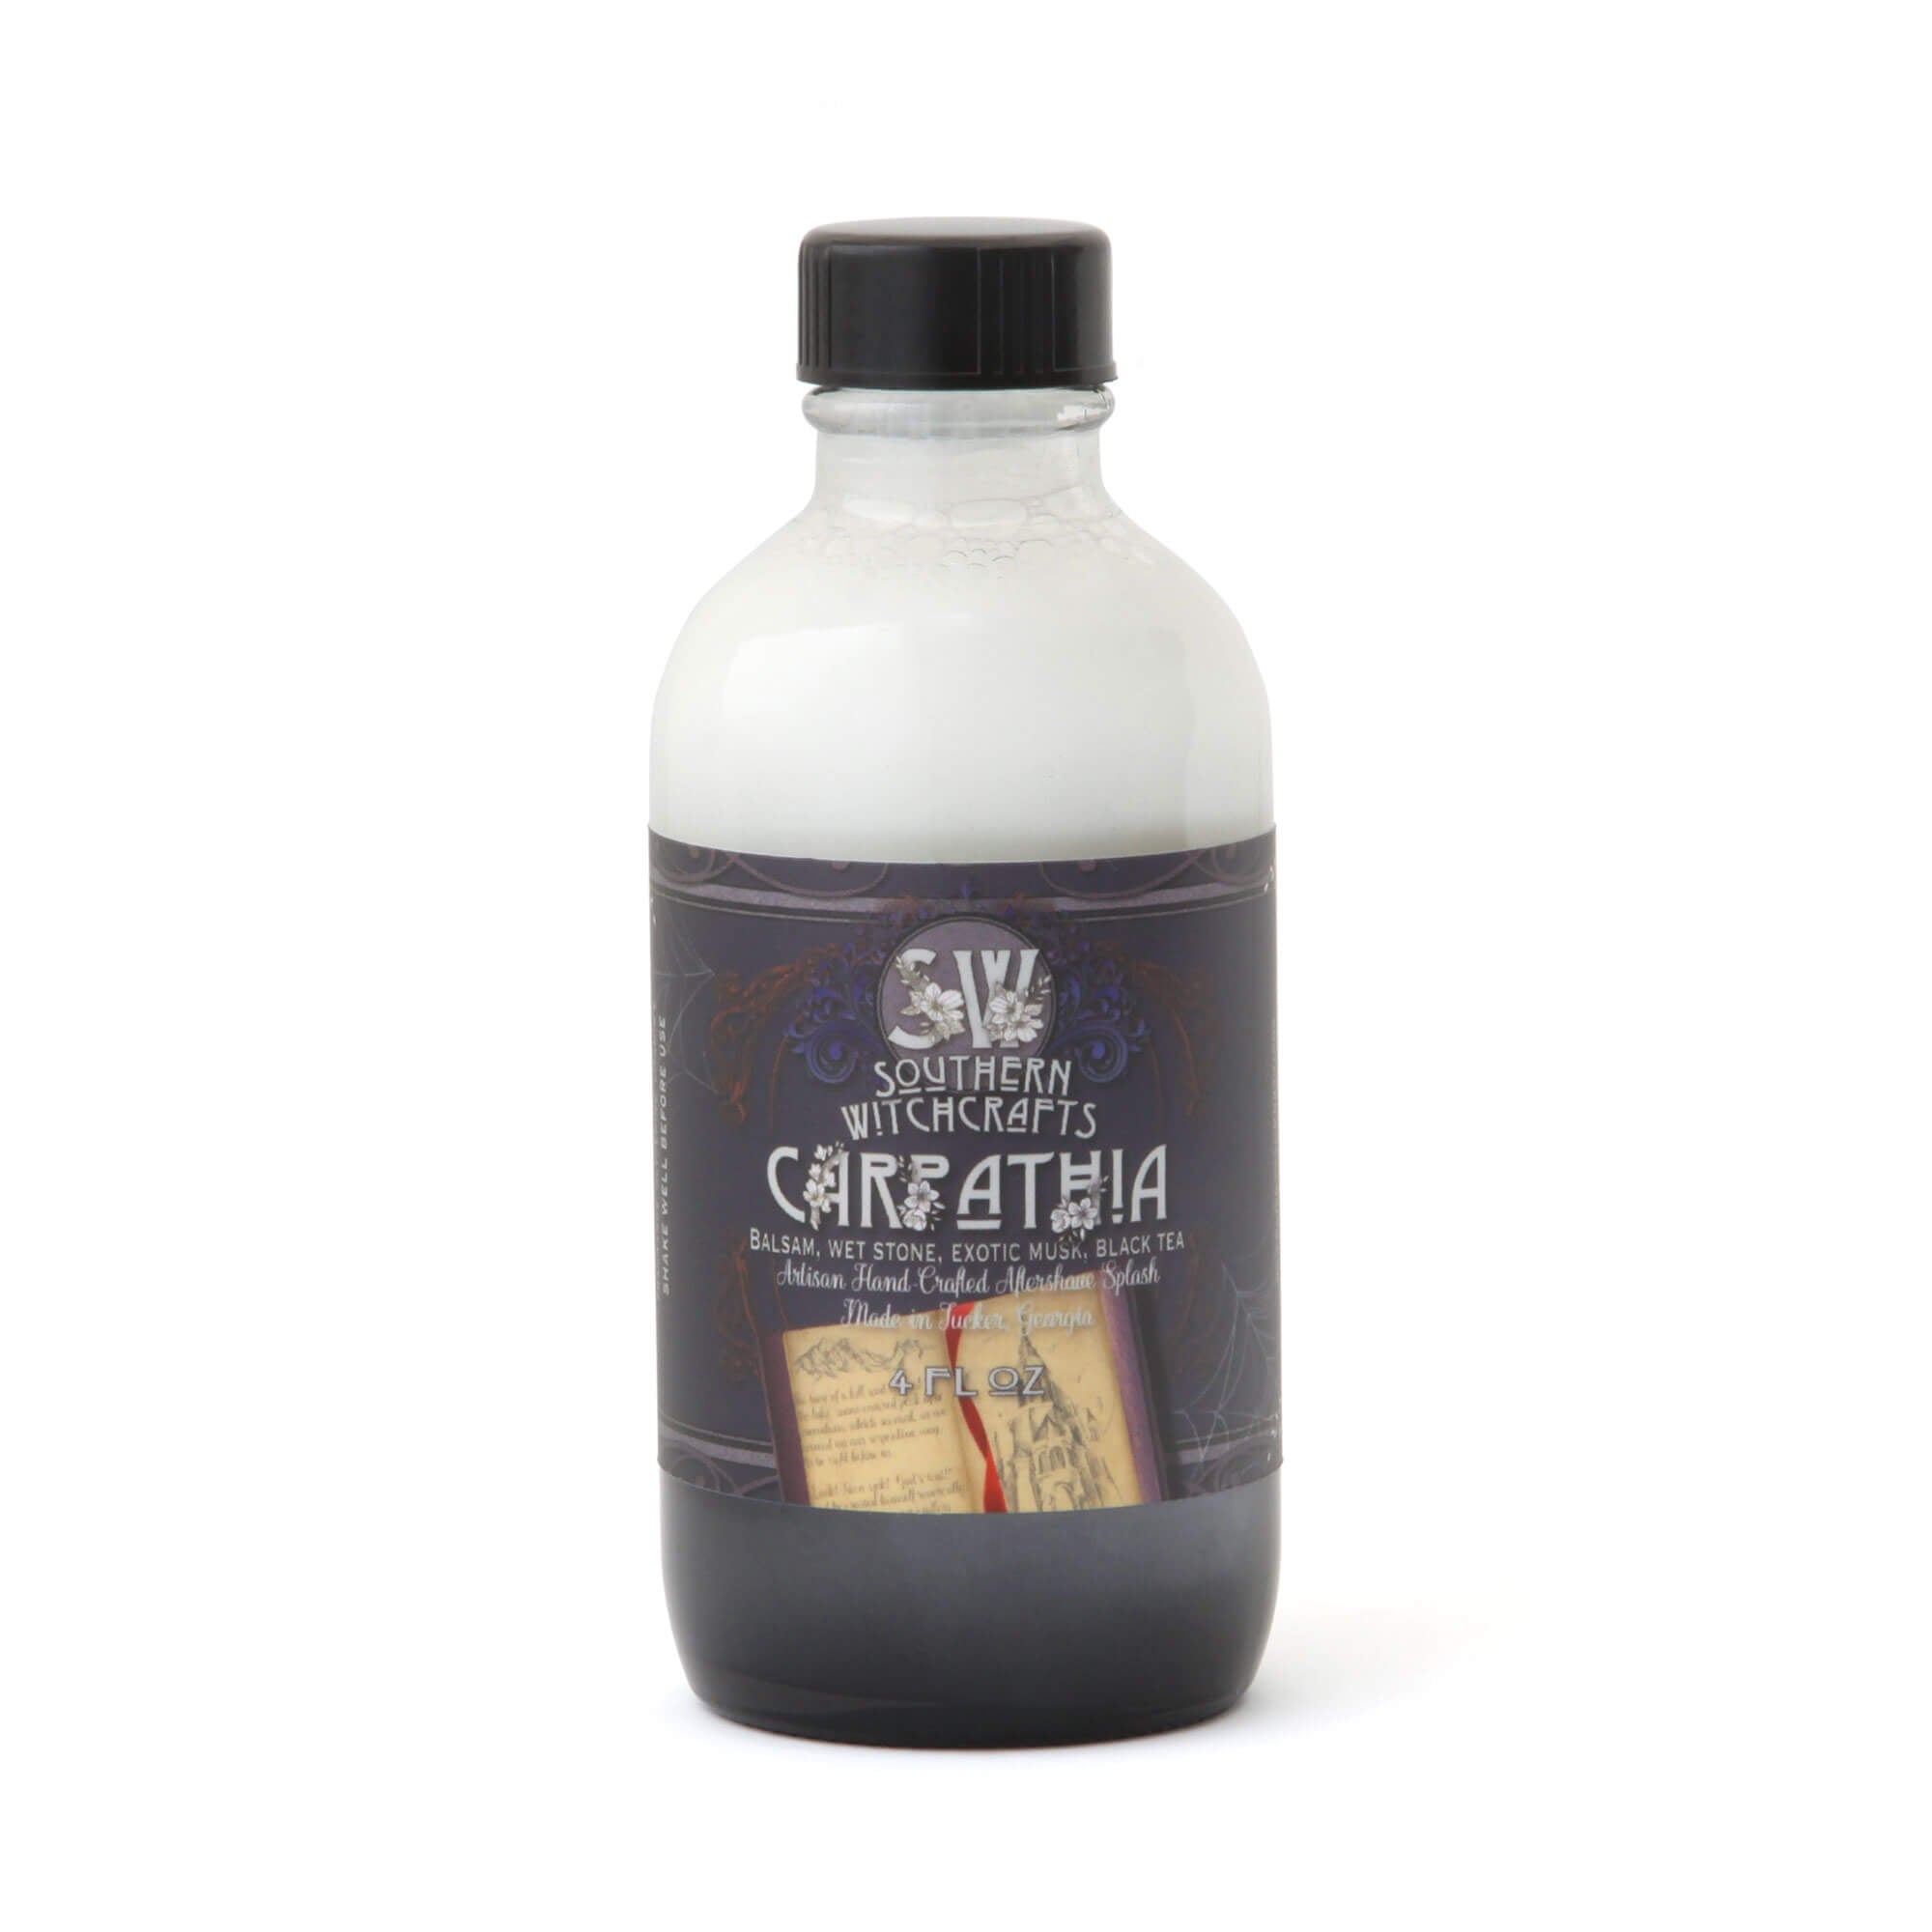 Southern Witchcrafts Carpathia Aftershave Splash